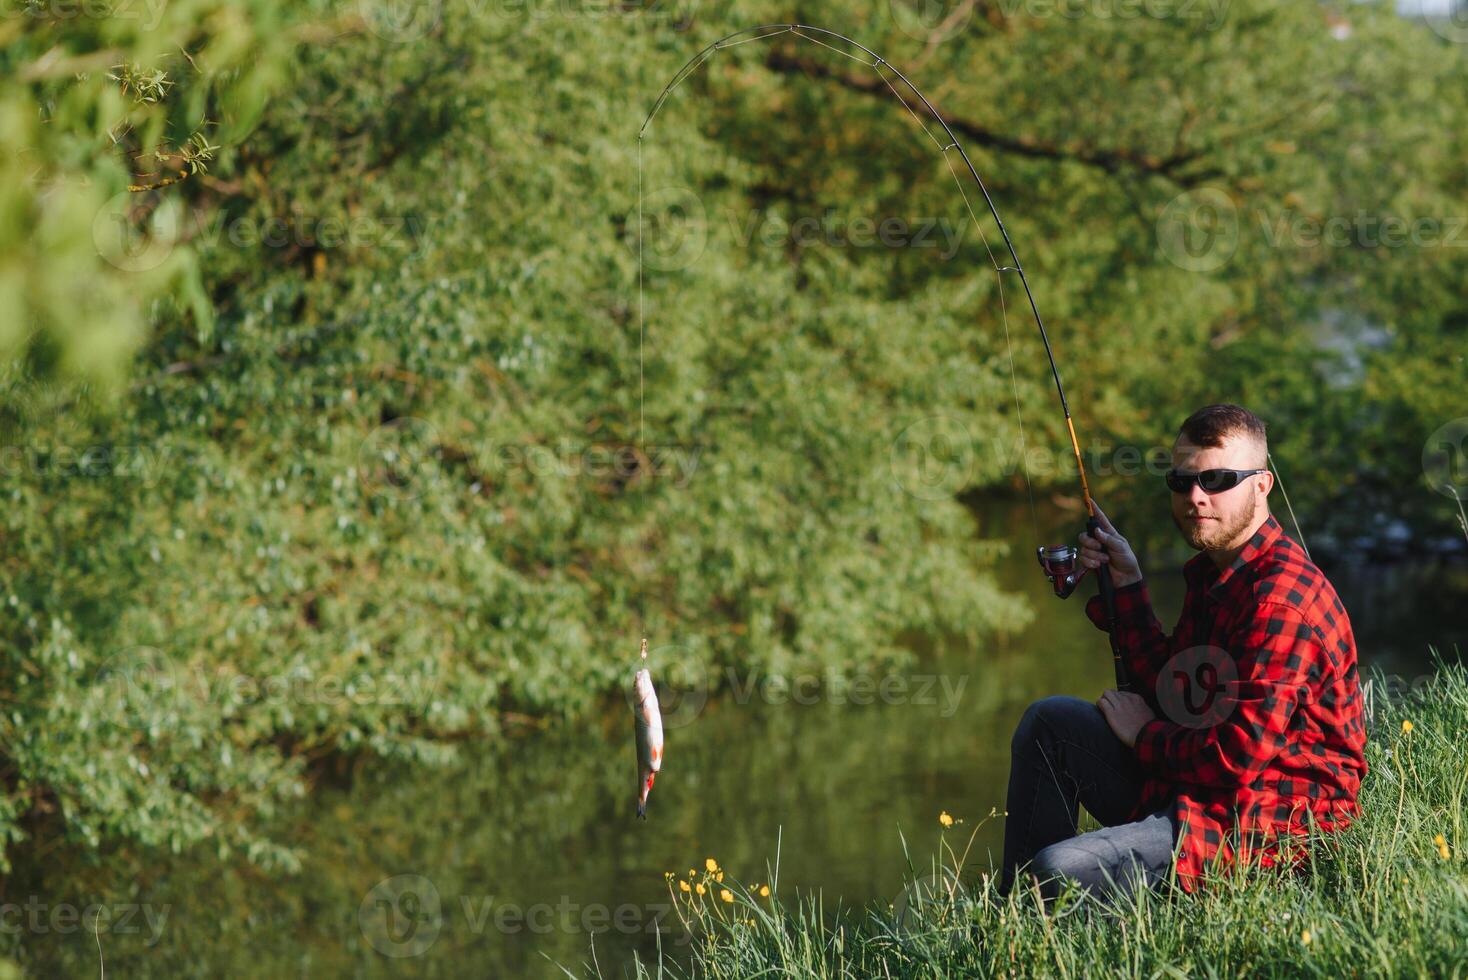 Fisher man fishing with spinning rod on a river bank, spin fishing, prey fishing photo